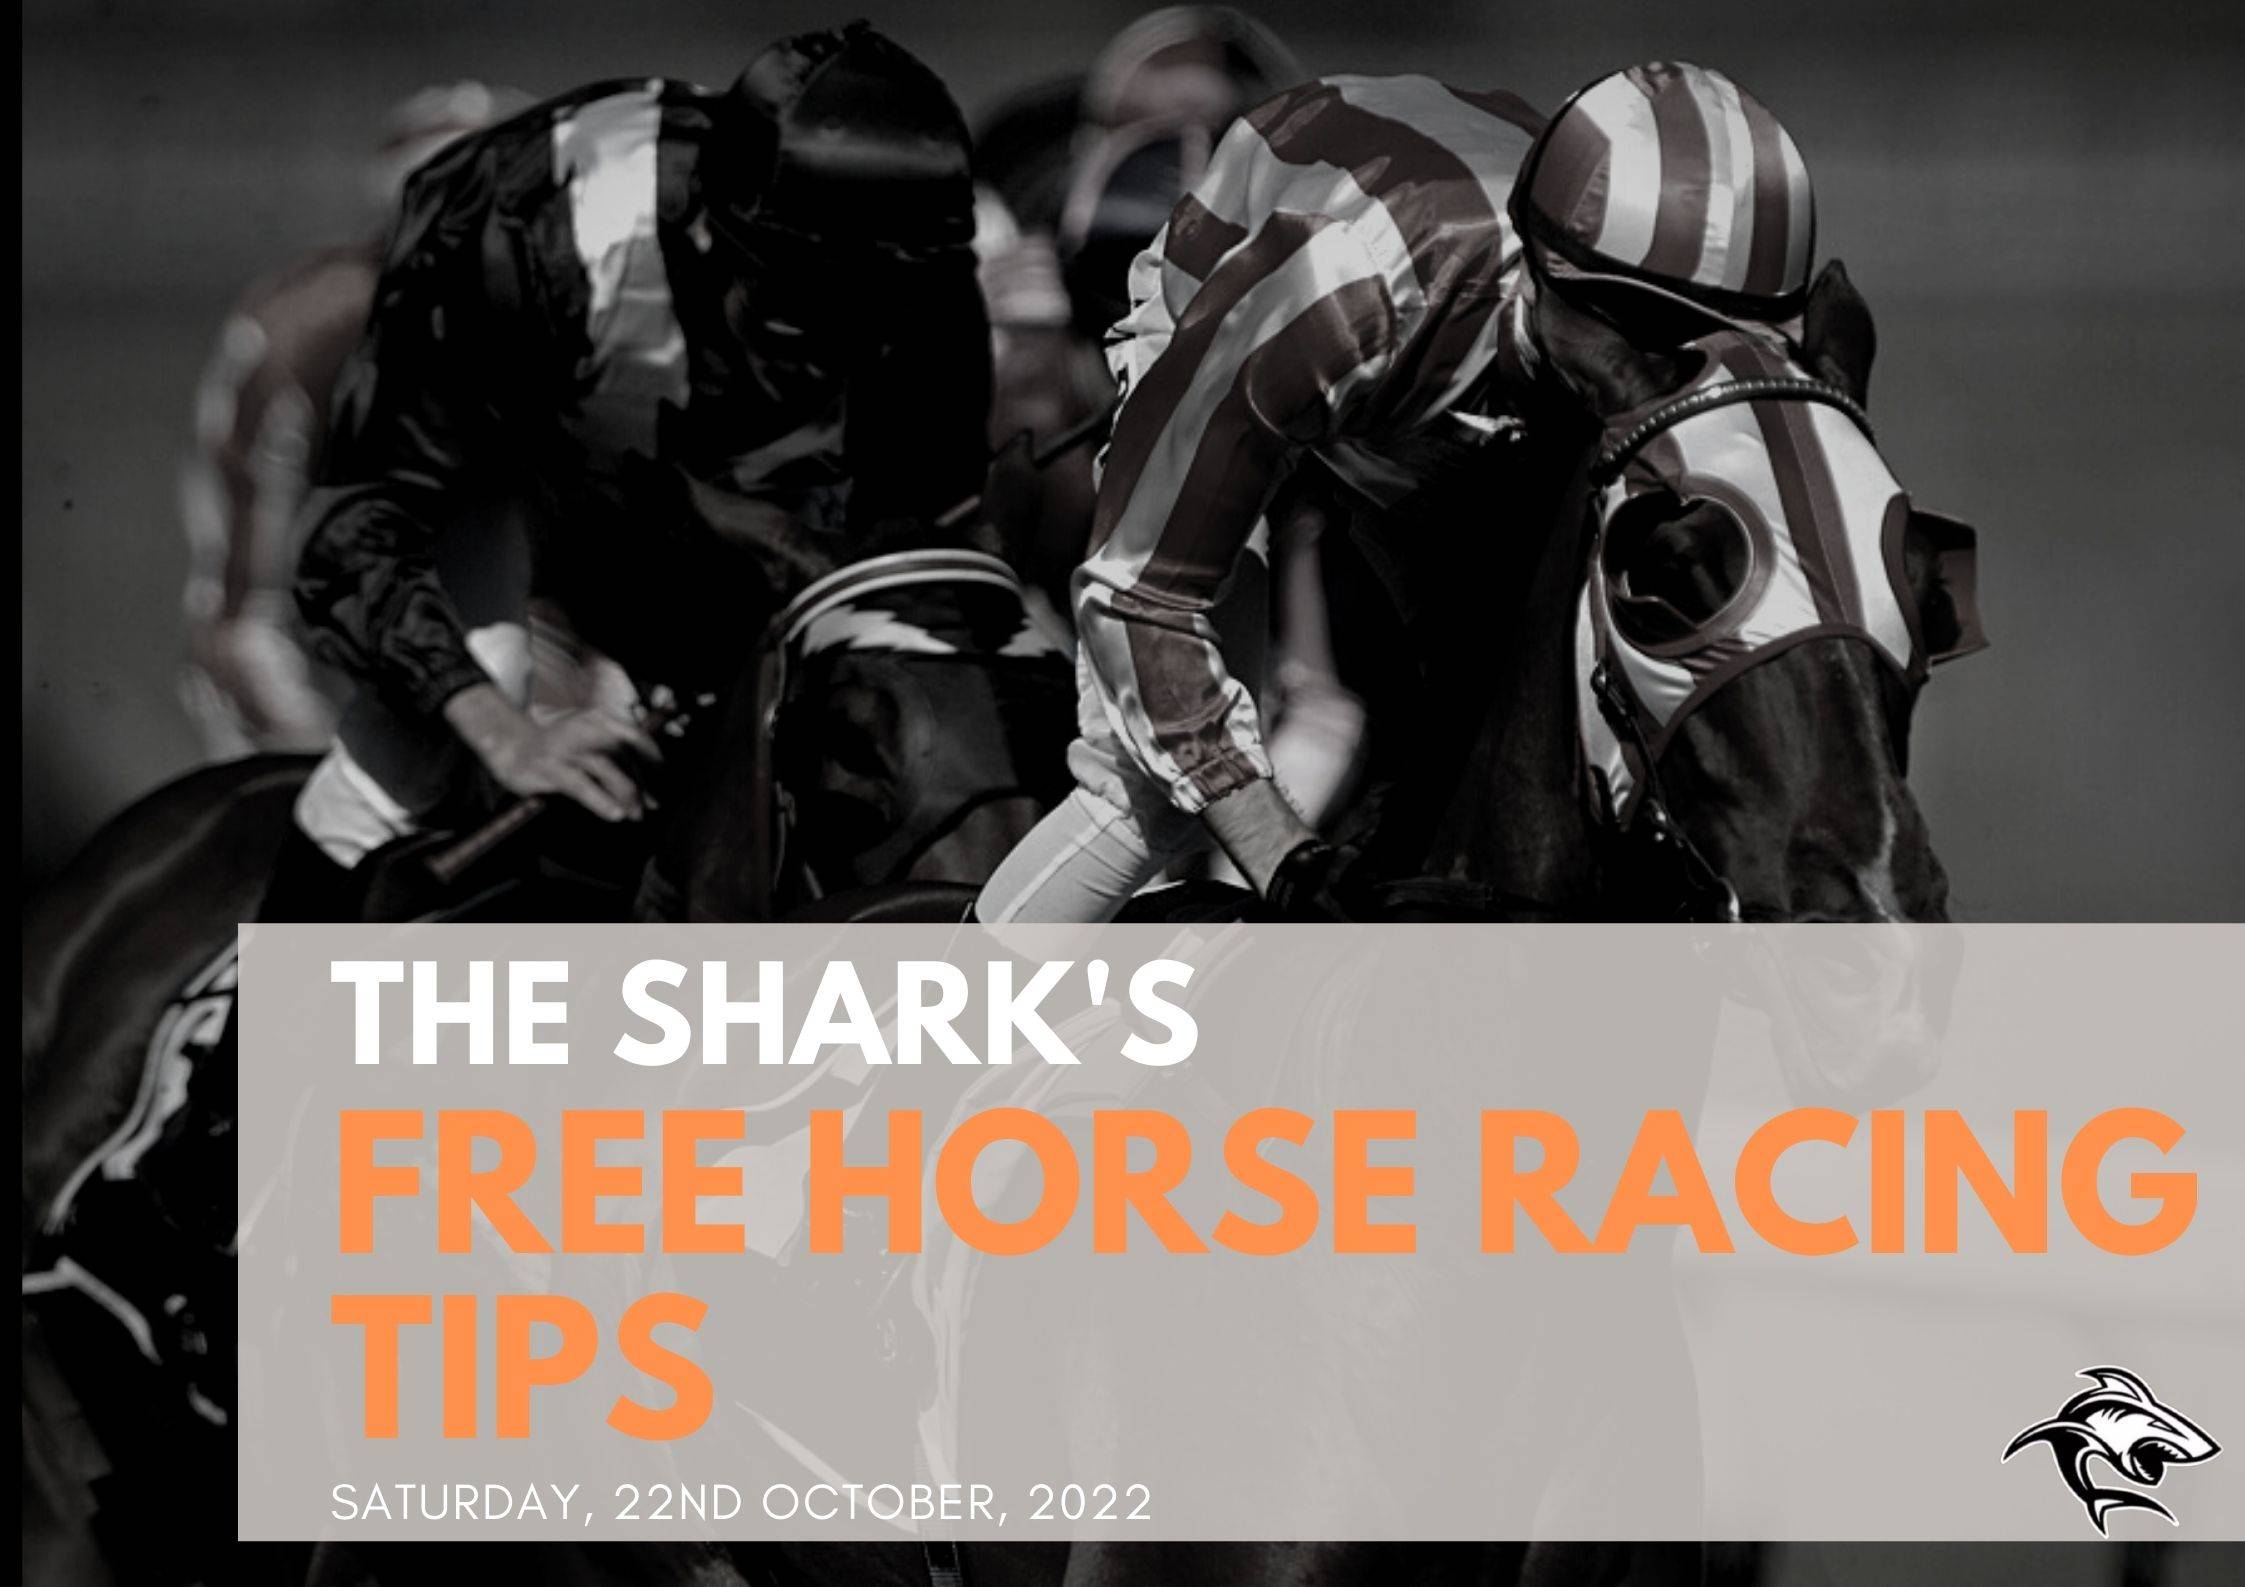 Free Horse Racing Tips - 22nd Oct